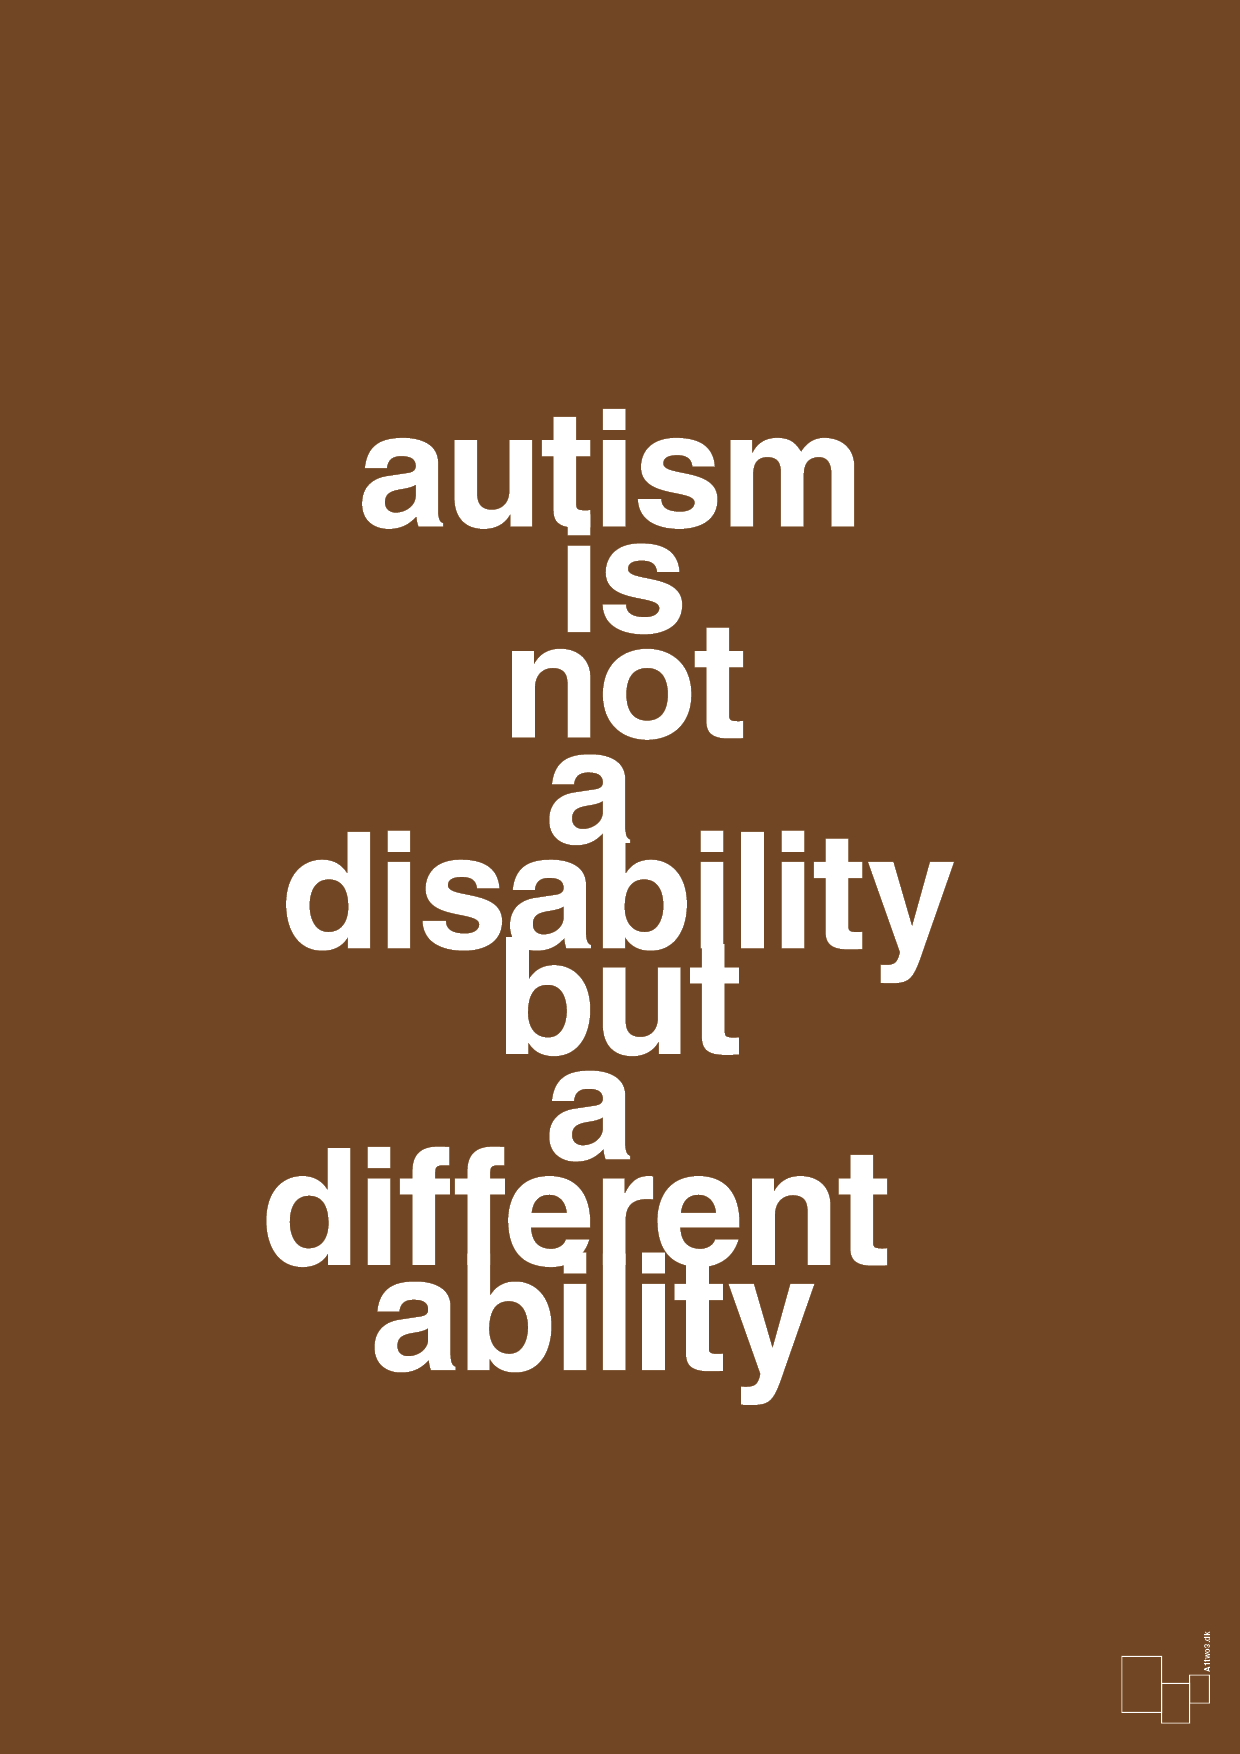 autism is not a disability but a different ability - Plakat med Samfund i Dark Brown